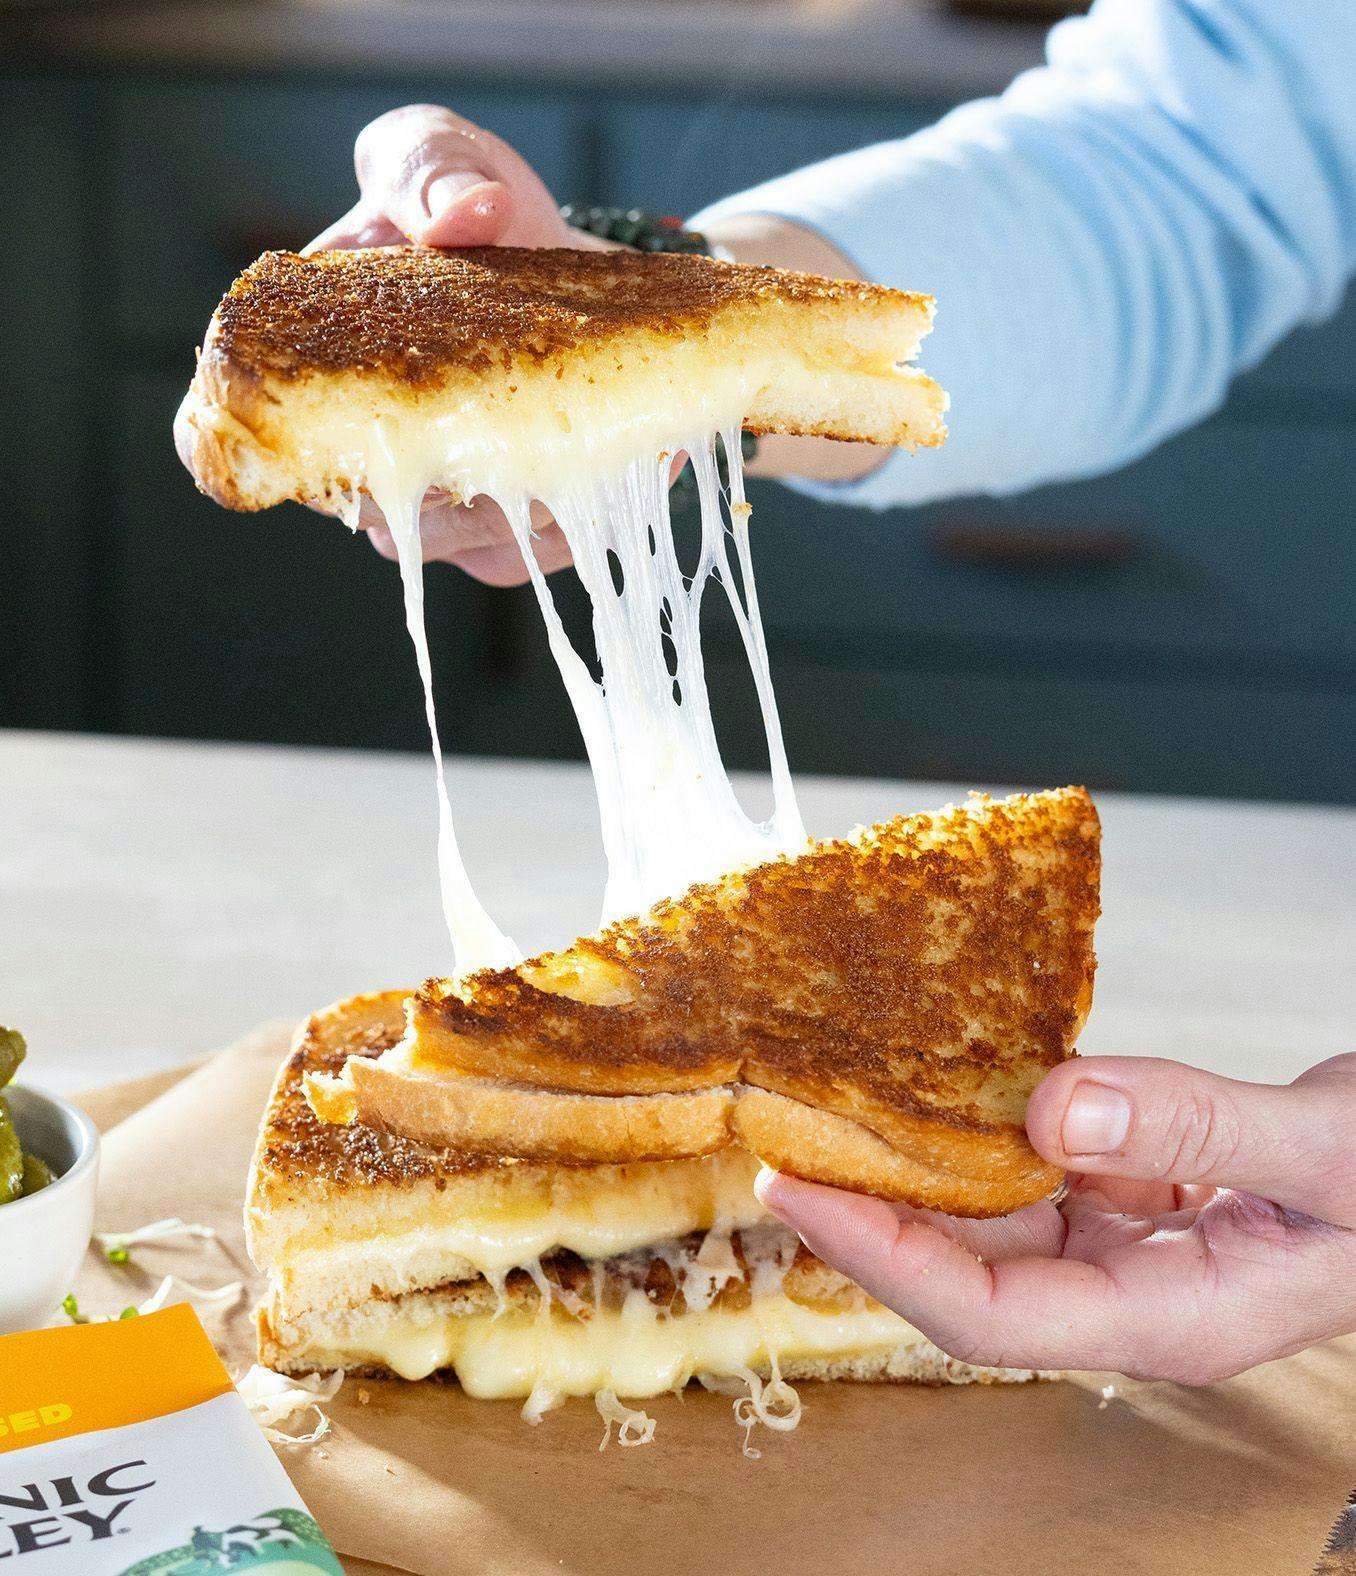 Organic Valley Flavor Favorites sliced cheese on bread to make a grilled cheese.